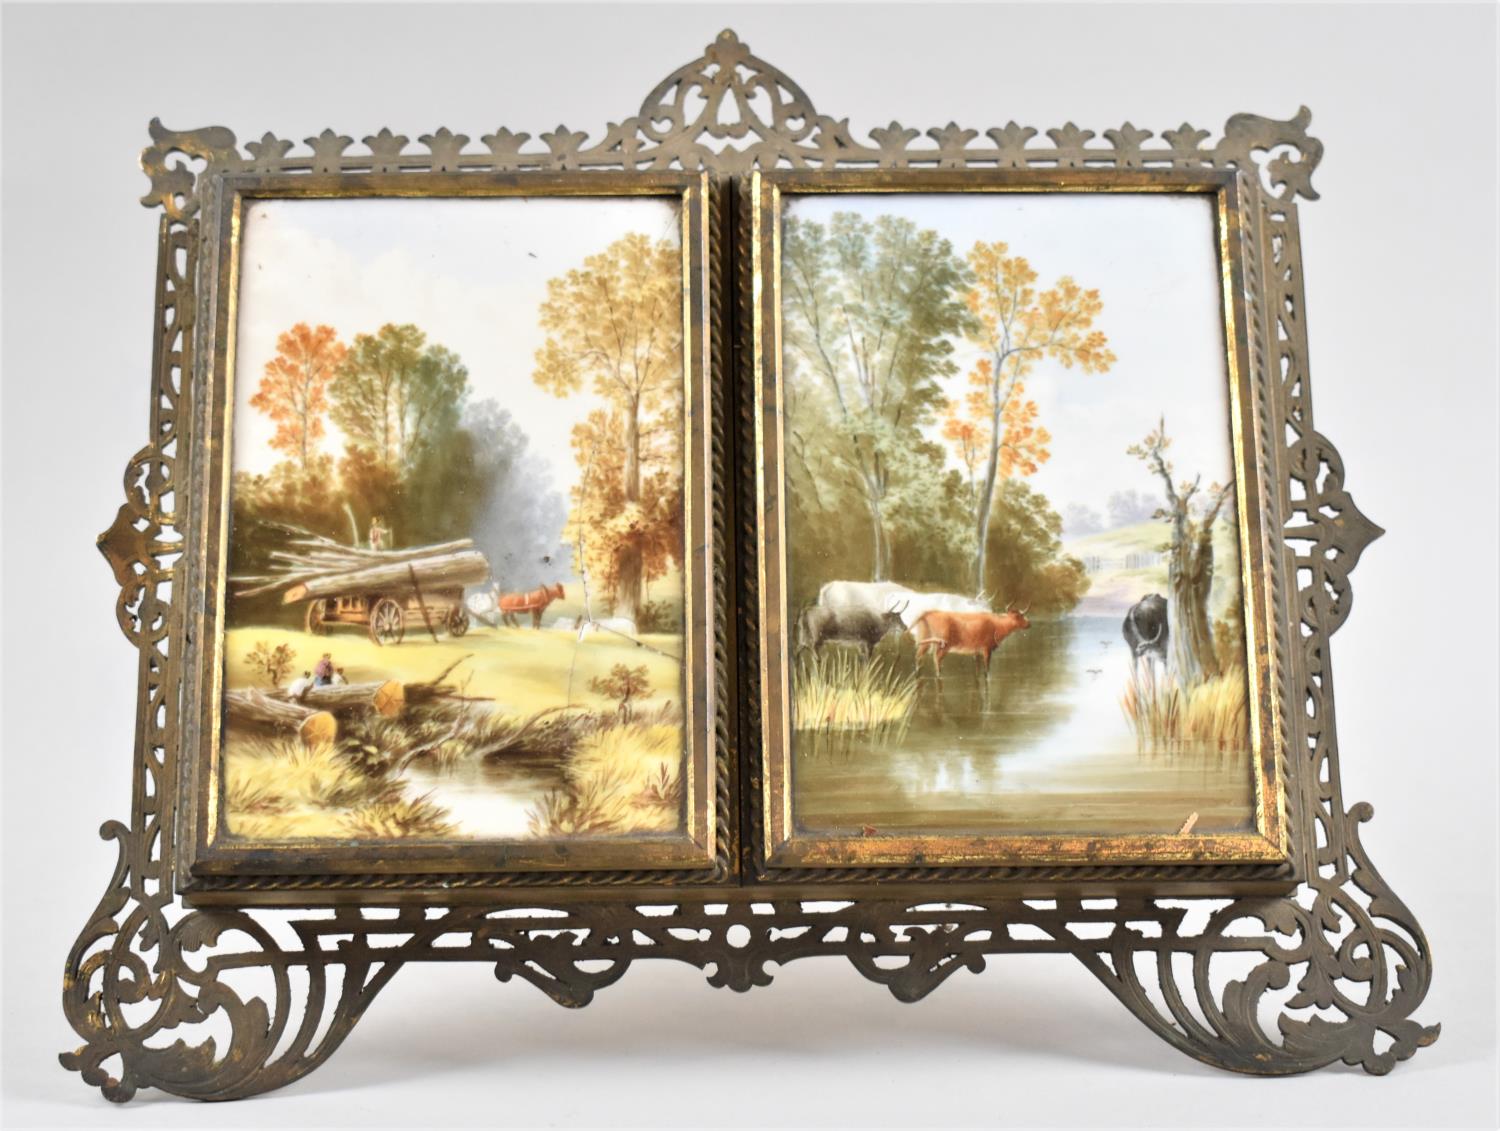 A Late 19th/Early 20th Century Continental Brass Pierced Easel Backed Picture Frame, Two Doors